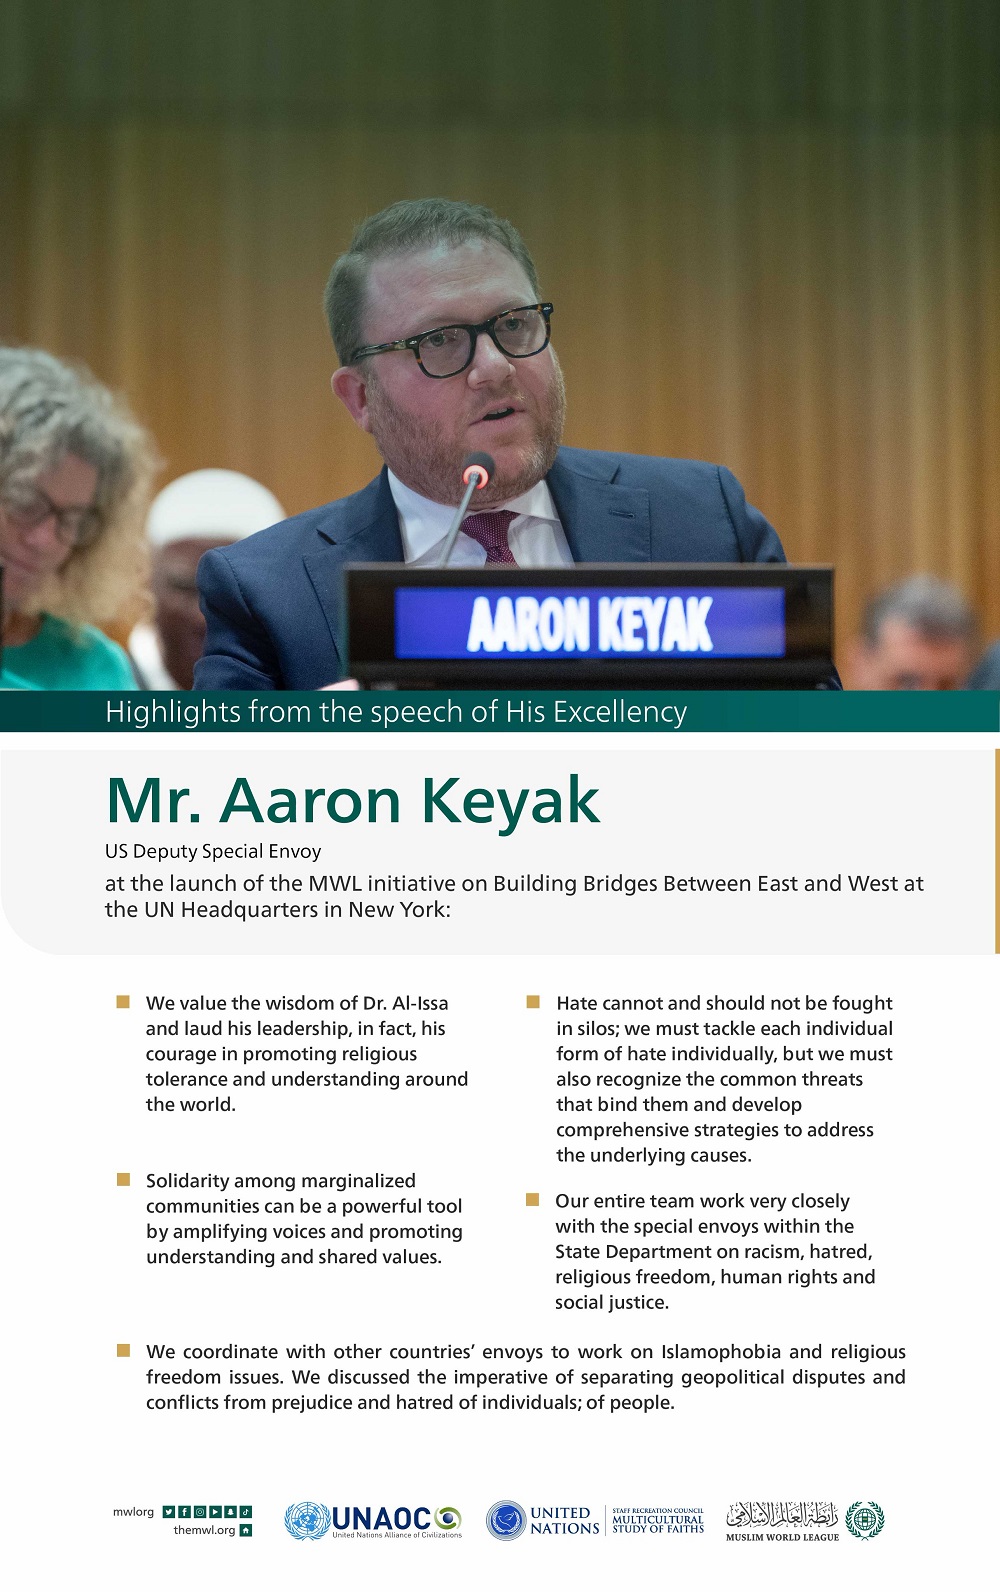 Highlights from the speech of His Excellency Mr. Aaron Keyak, US Deputy Special Envoy, at the launch of the MWL initiative on Building Bridges between East and West at the UN headquarters in New York: